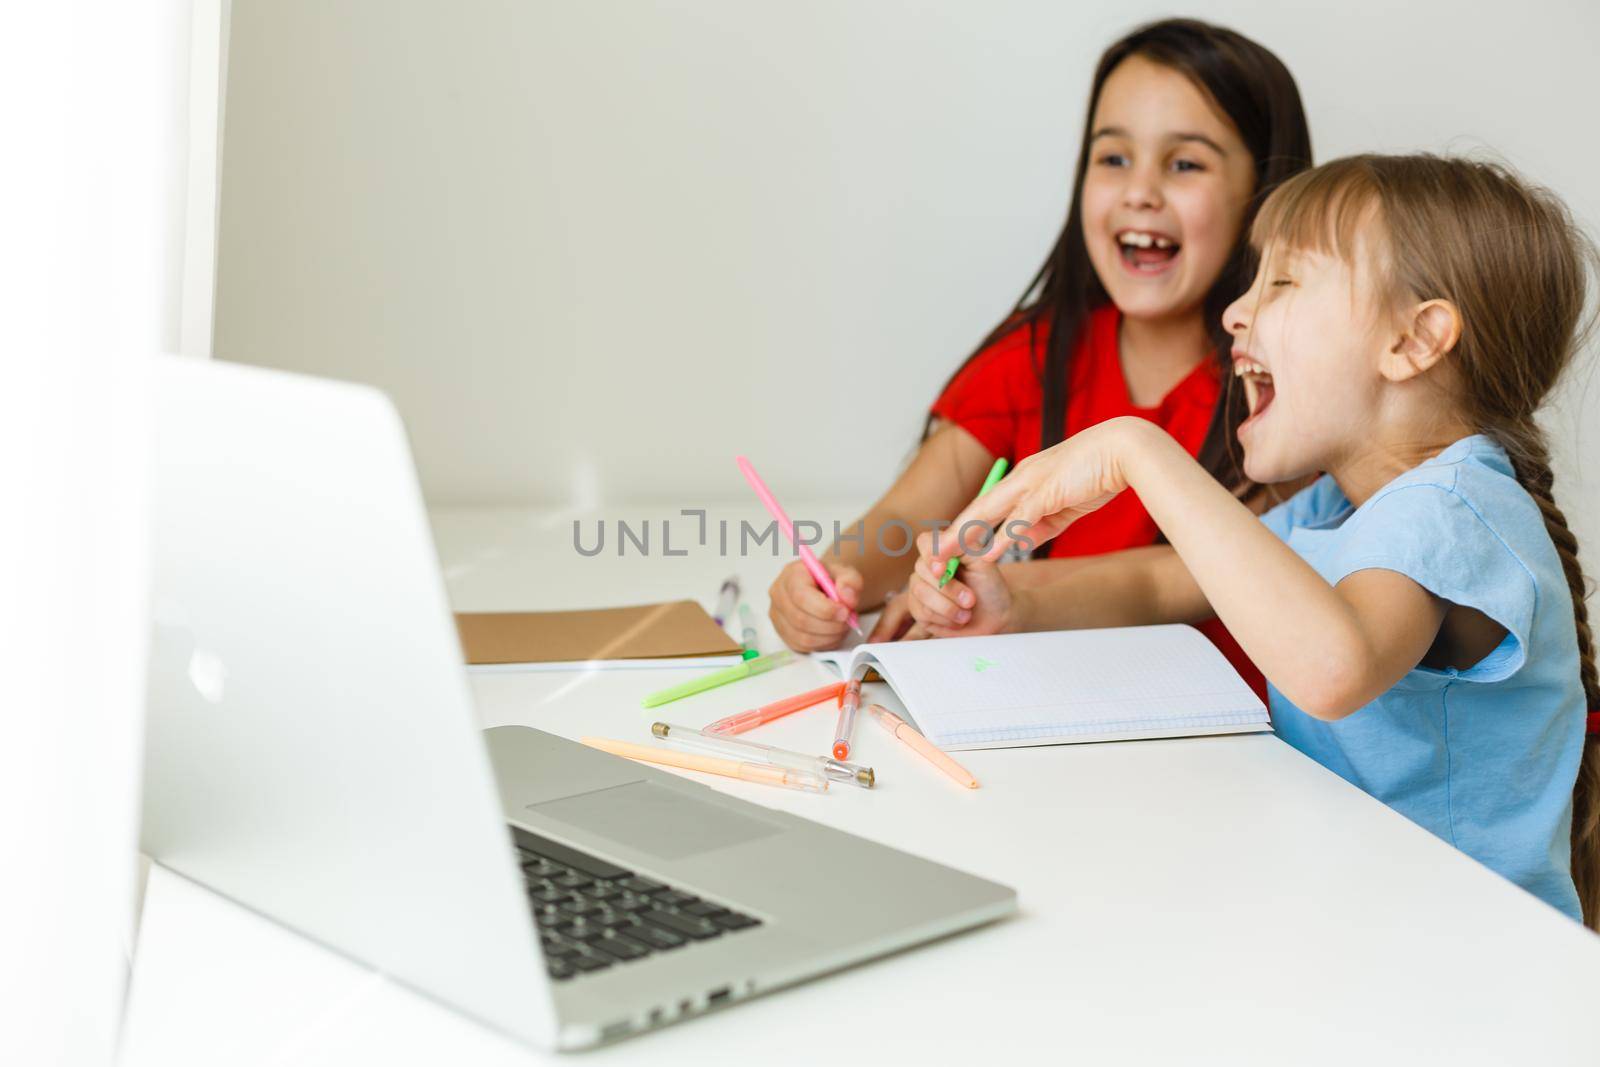 Cool online school. Kids studying online at home using a laptop. Cheerful young little girls using laptop computer studying through online e-learning system. Distance or remote learning by Andelov13